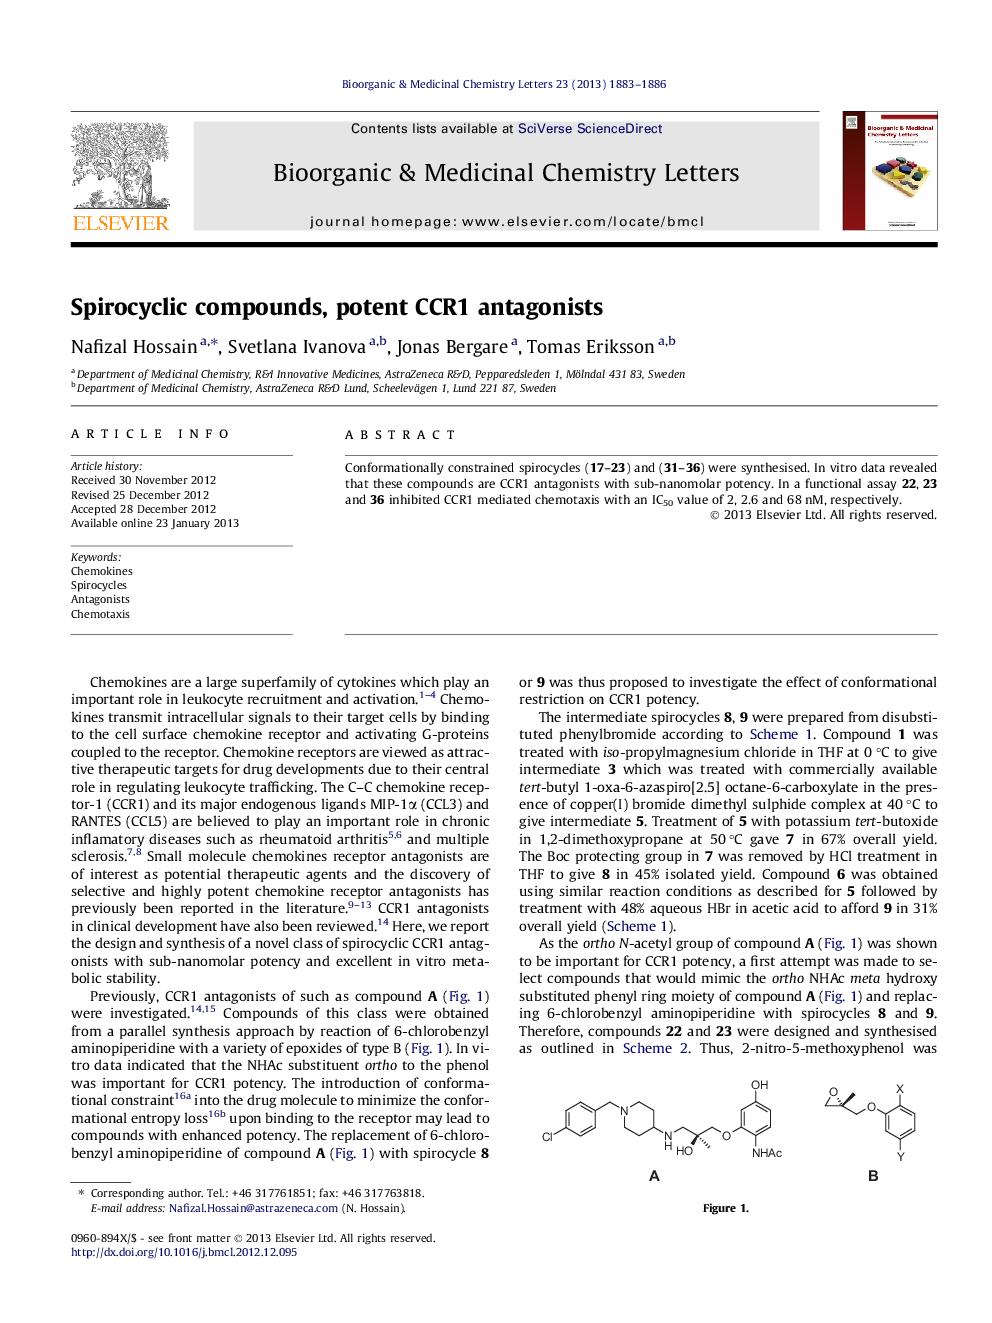 Spirocyclic compounds, potent CCR1 antagonists